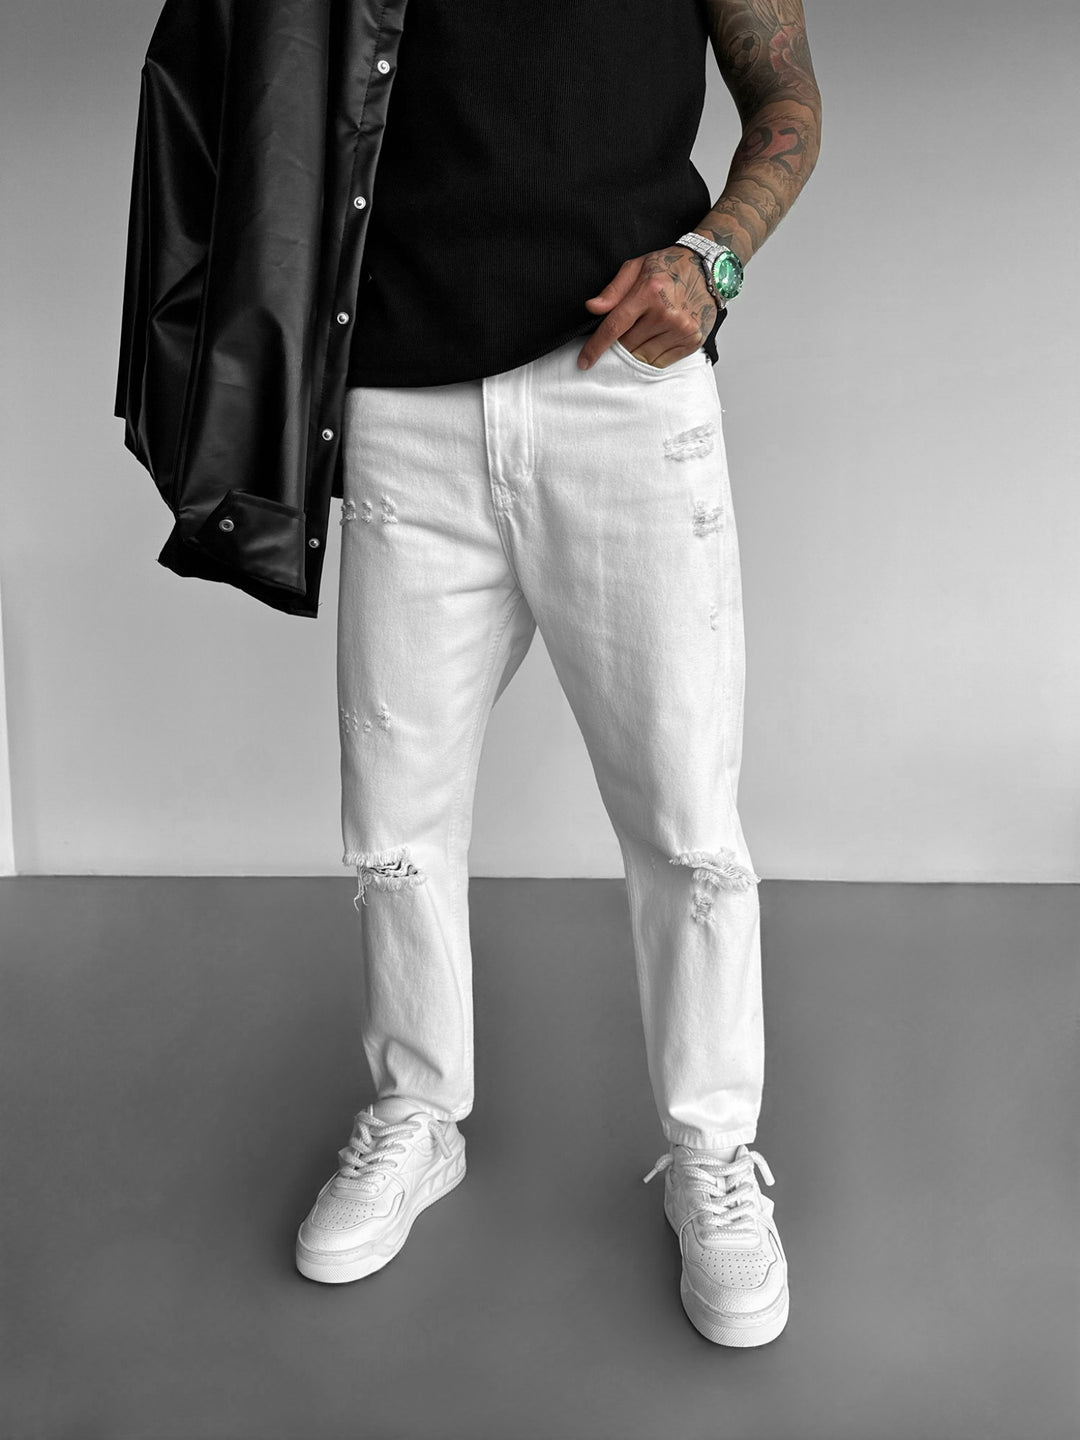 Baggy Torn Jeans - White